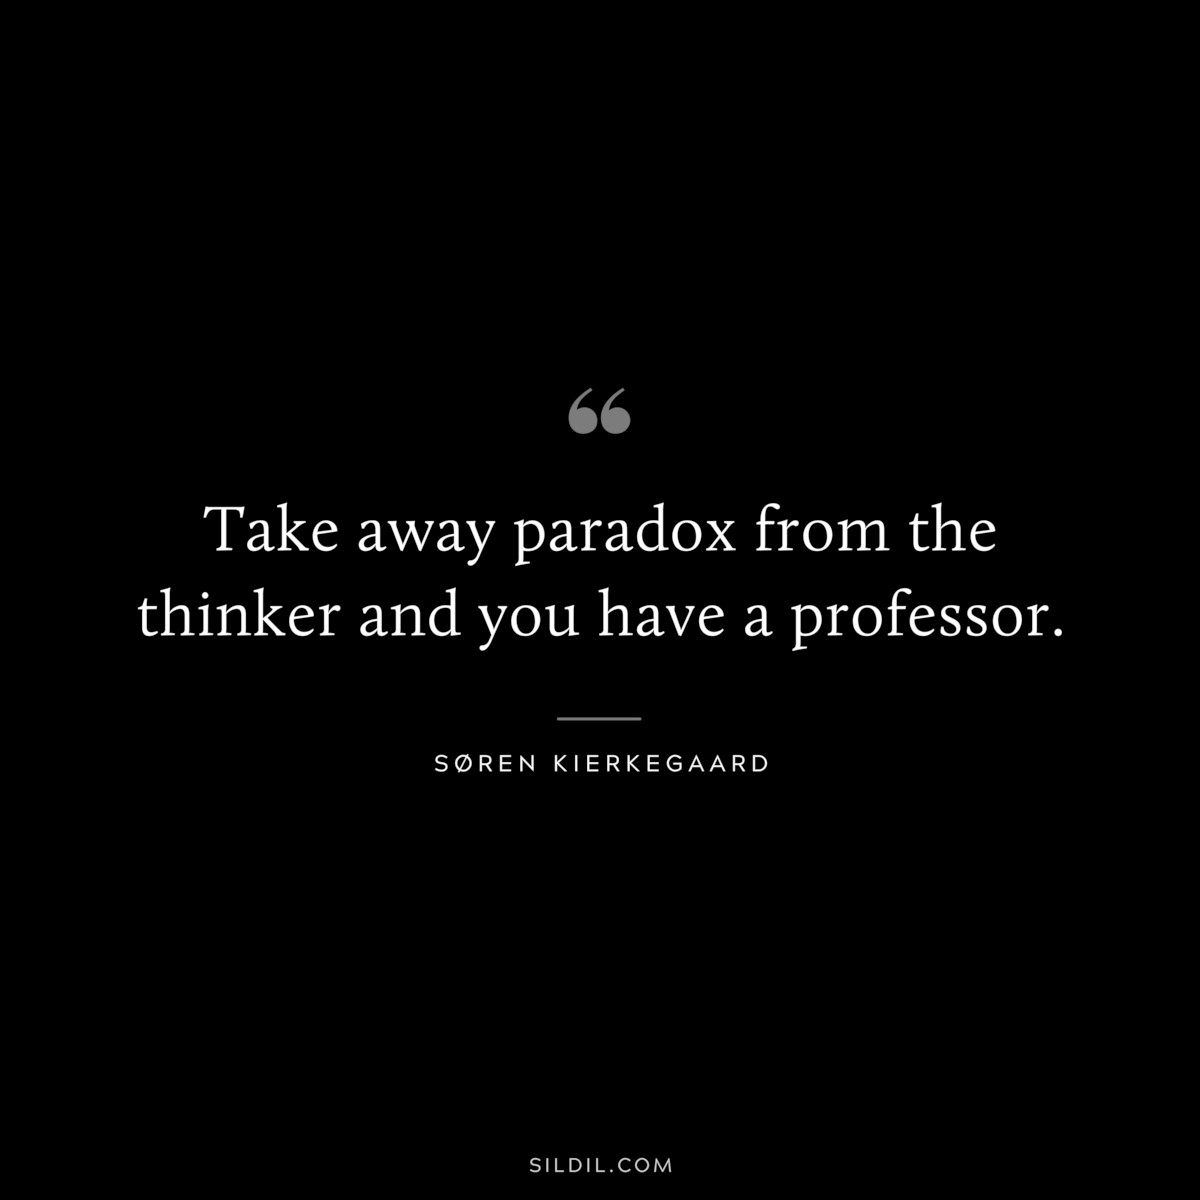 Take away paradox from the thinker and you have a professor. ― Søren Kierkegaard